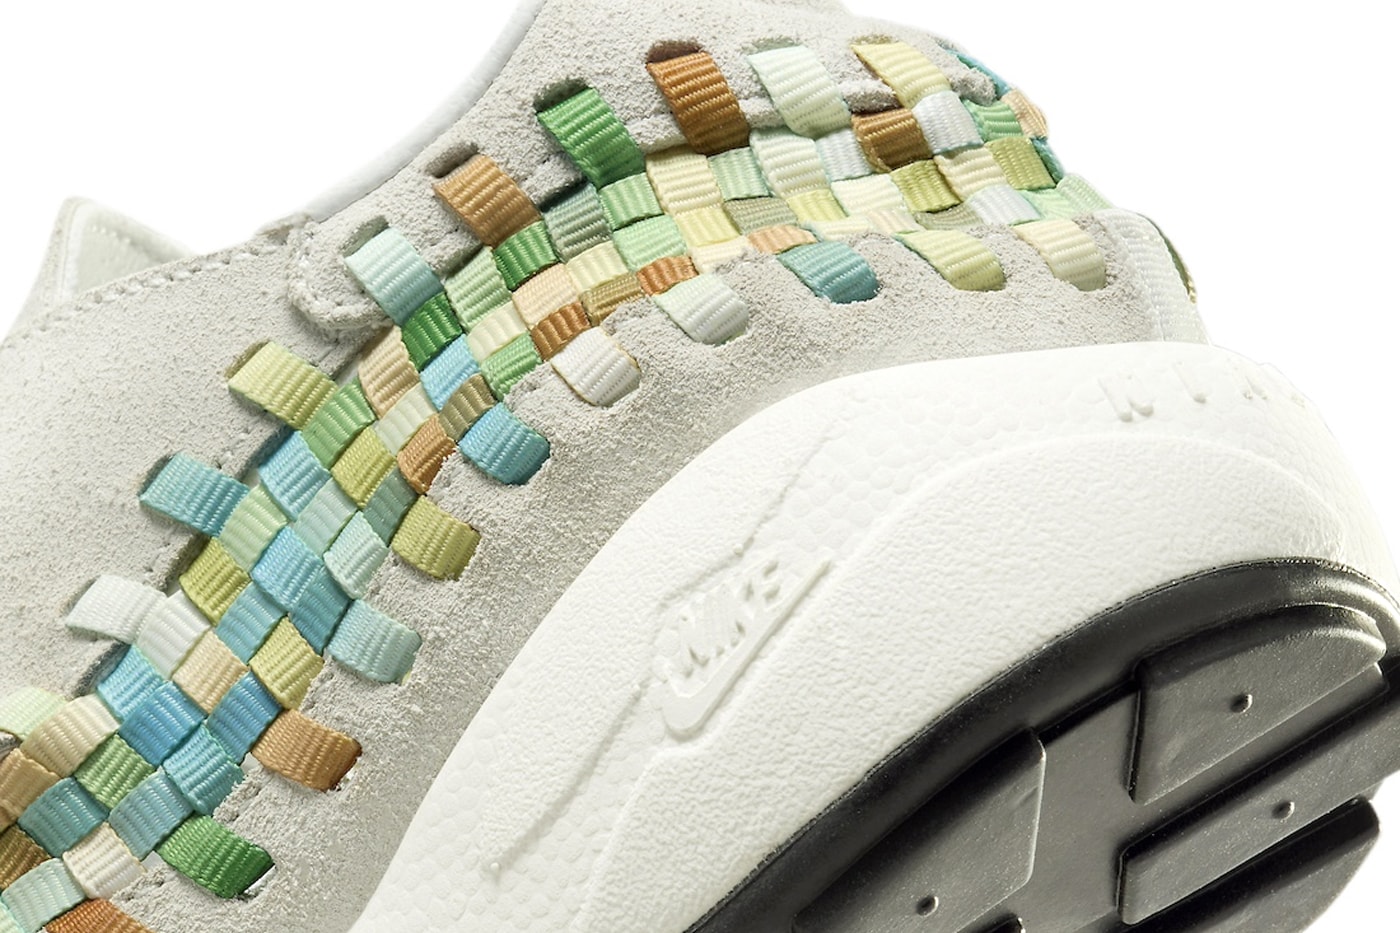 Nike Air Footscape Woven "Rainbow" Returns Next Year  FB1959-101 Release Info 